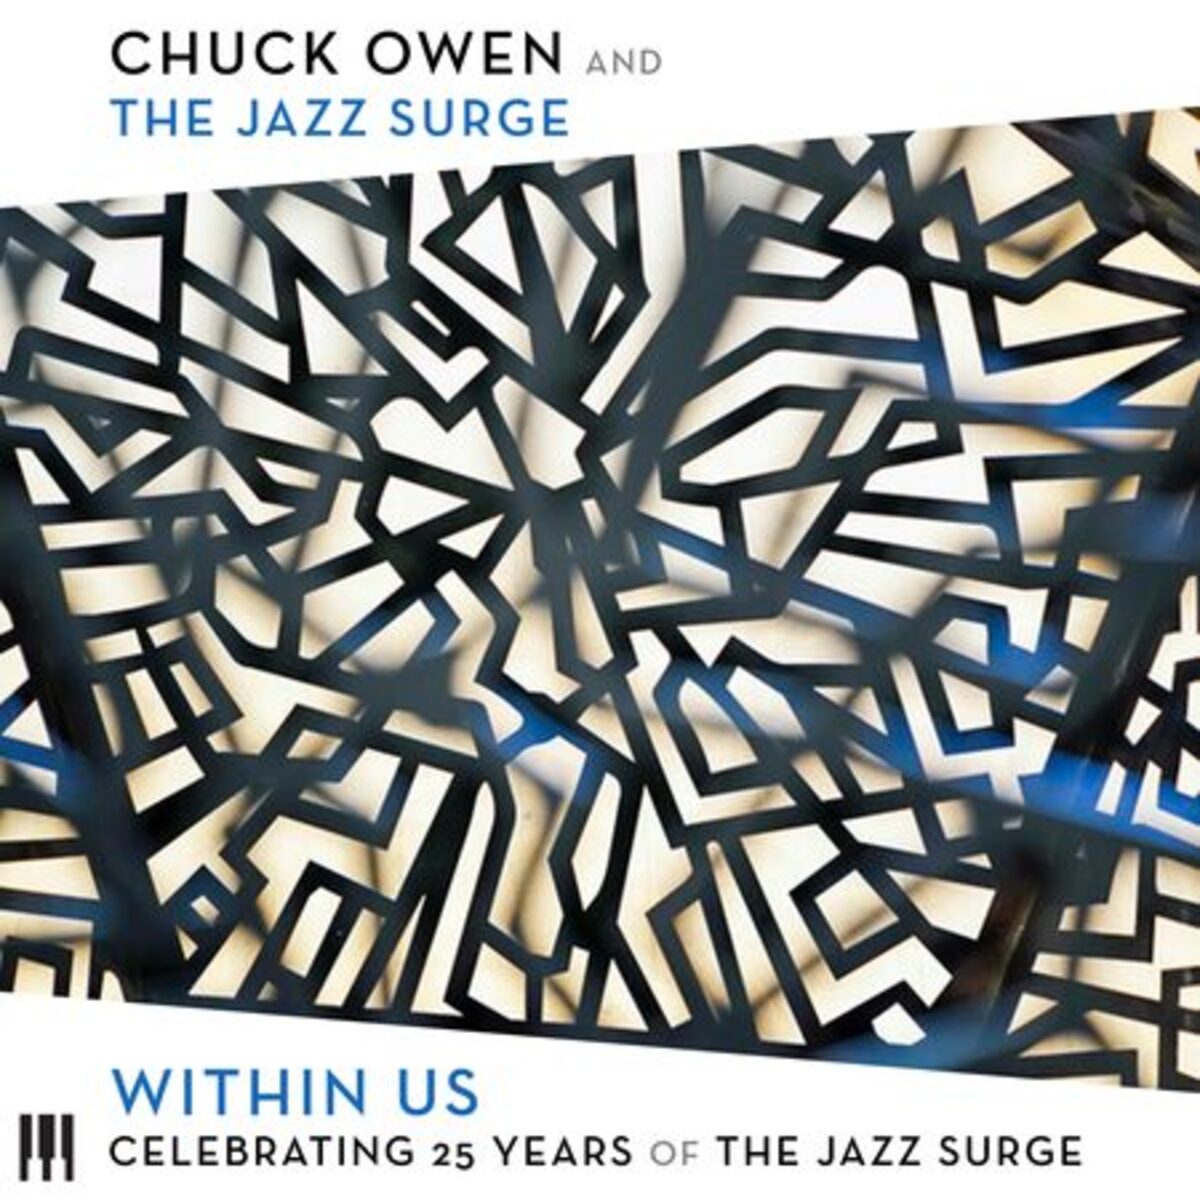 Chuck Owen and the Jazz Surge